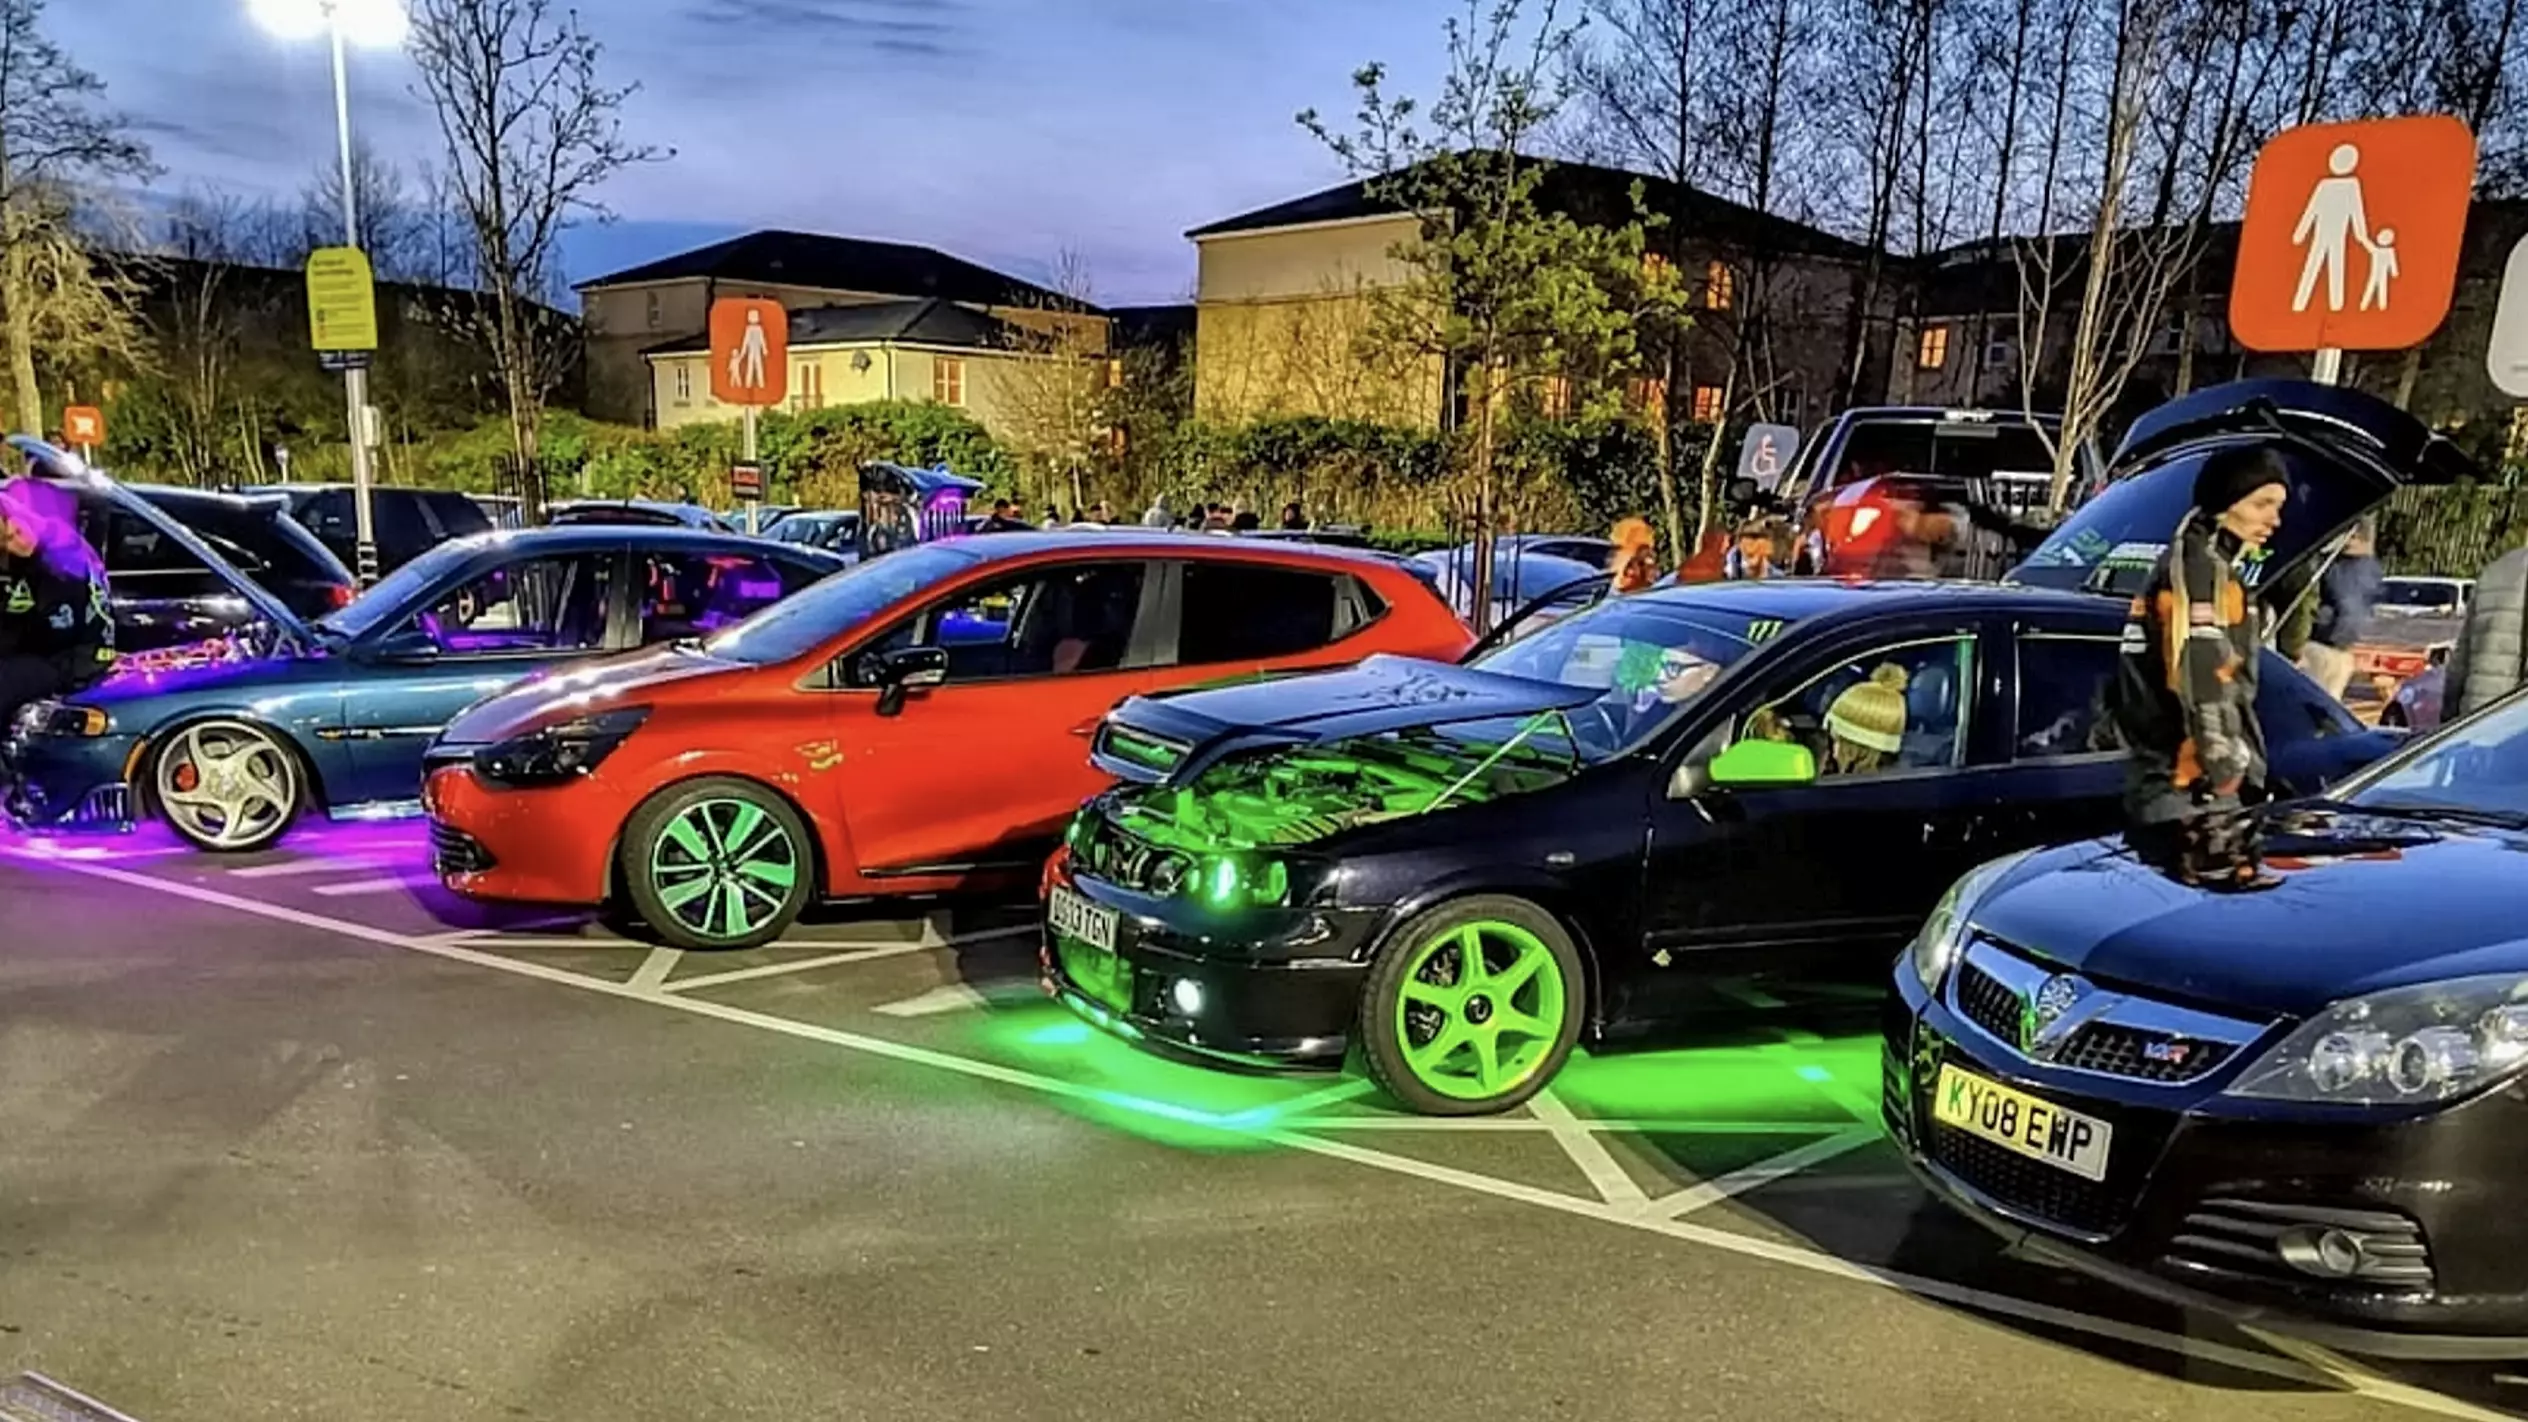 Boy Racers Slapped With £13,000 Fine For Night Time Supermarket Meet-Up